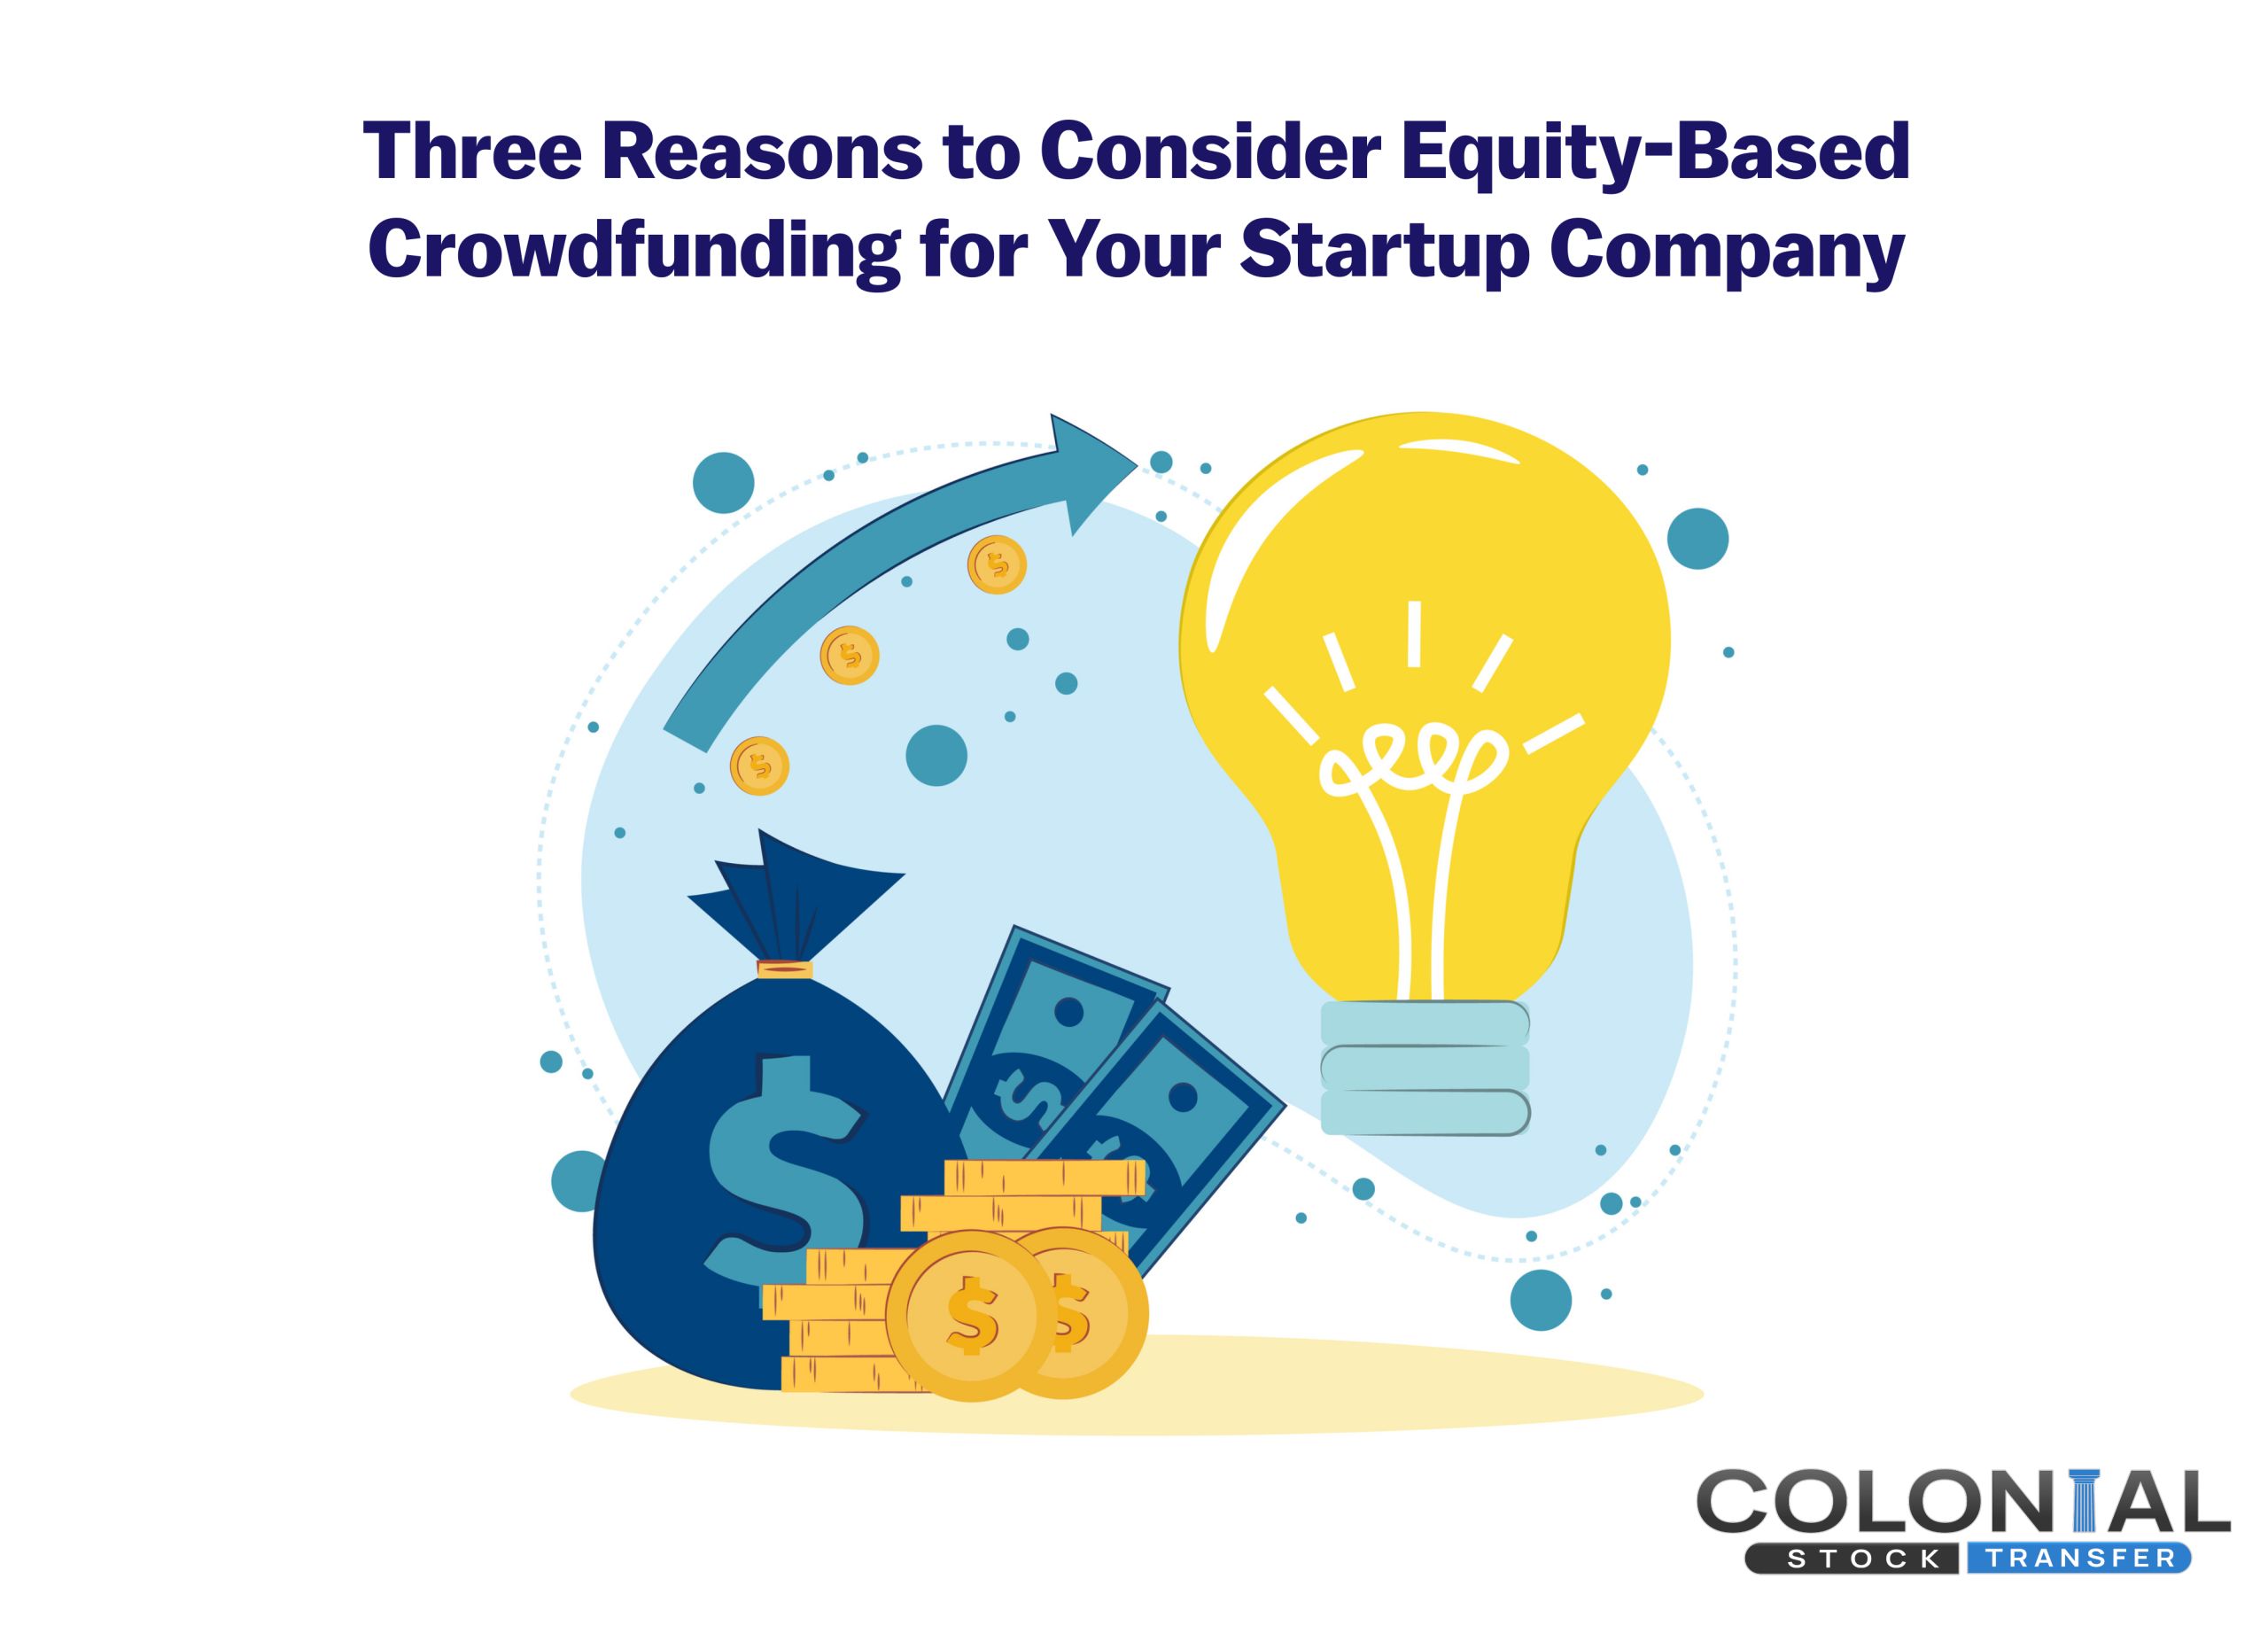 Three Reasons to Consider Equity-Based Crowdfunding for Your Startup Company